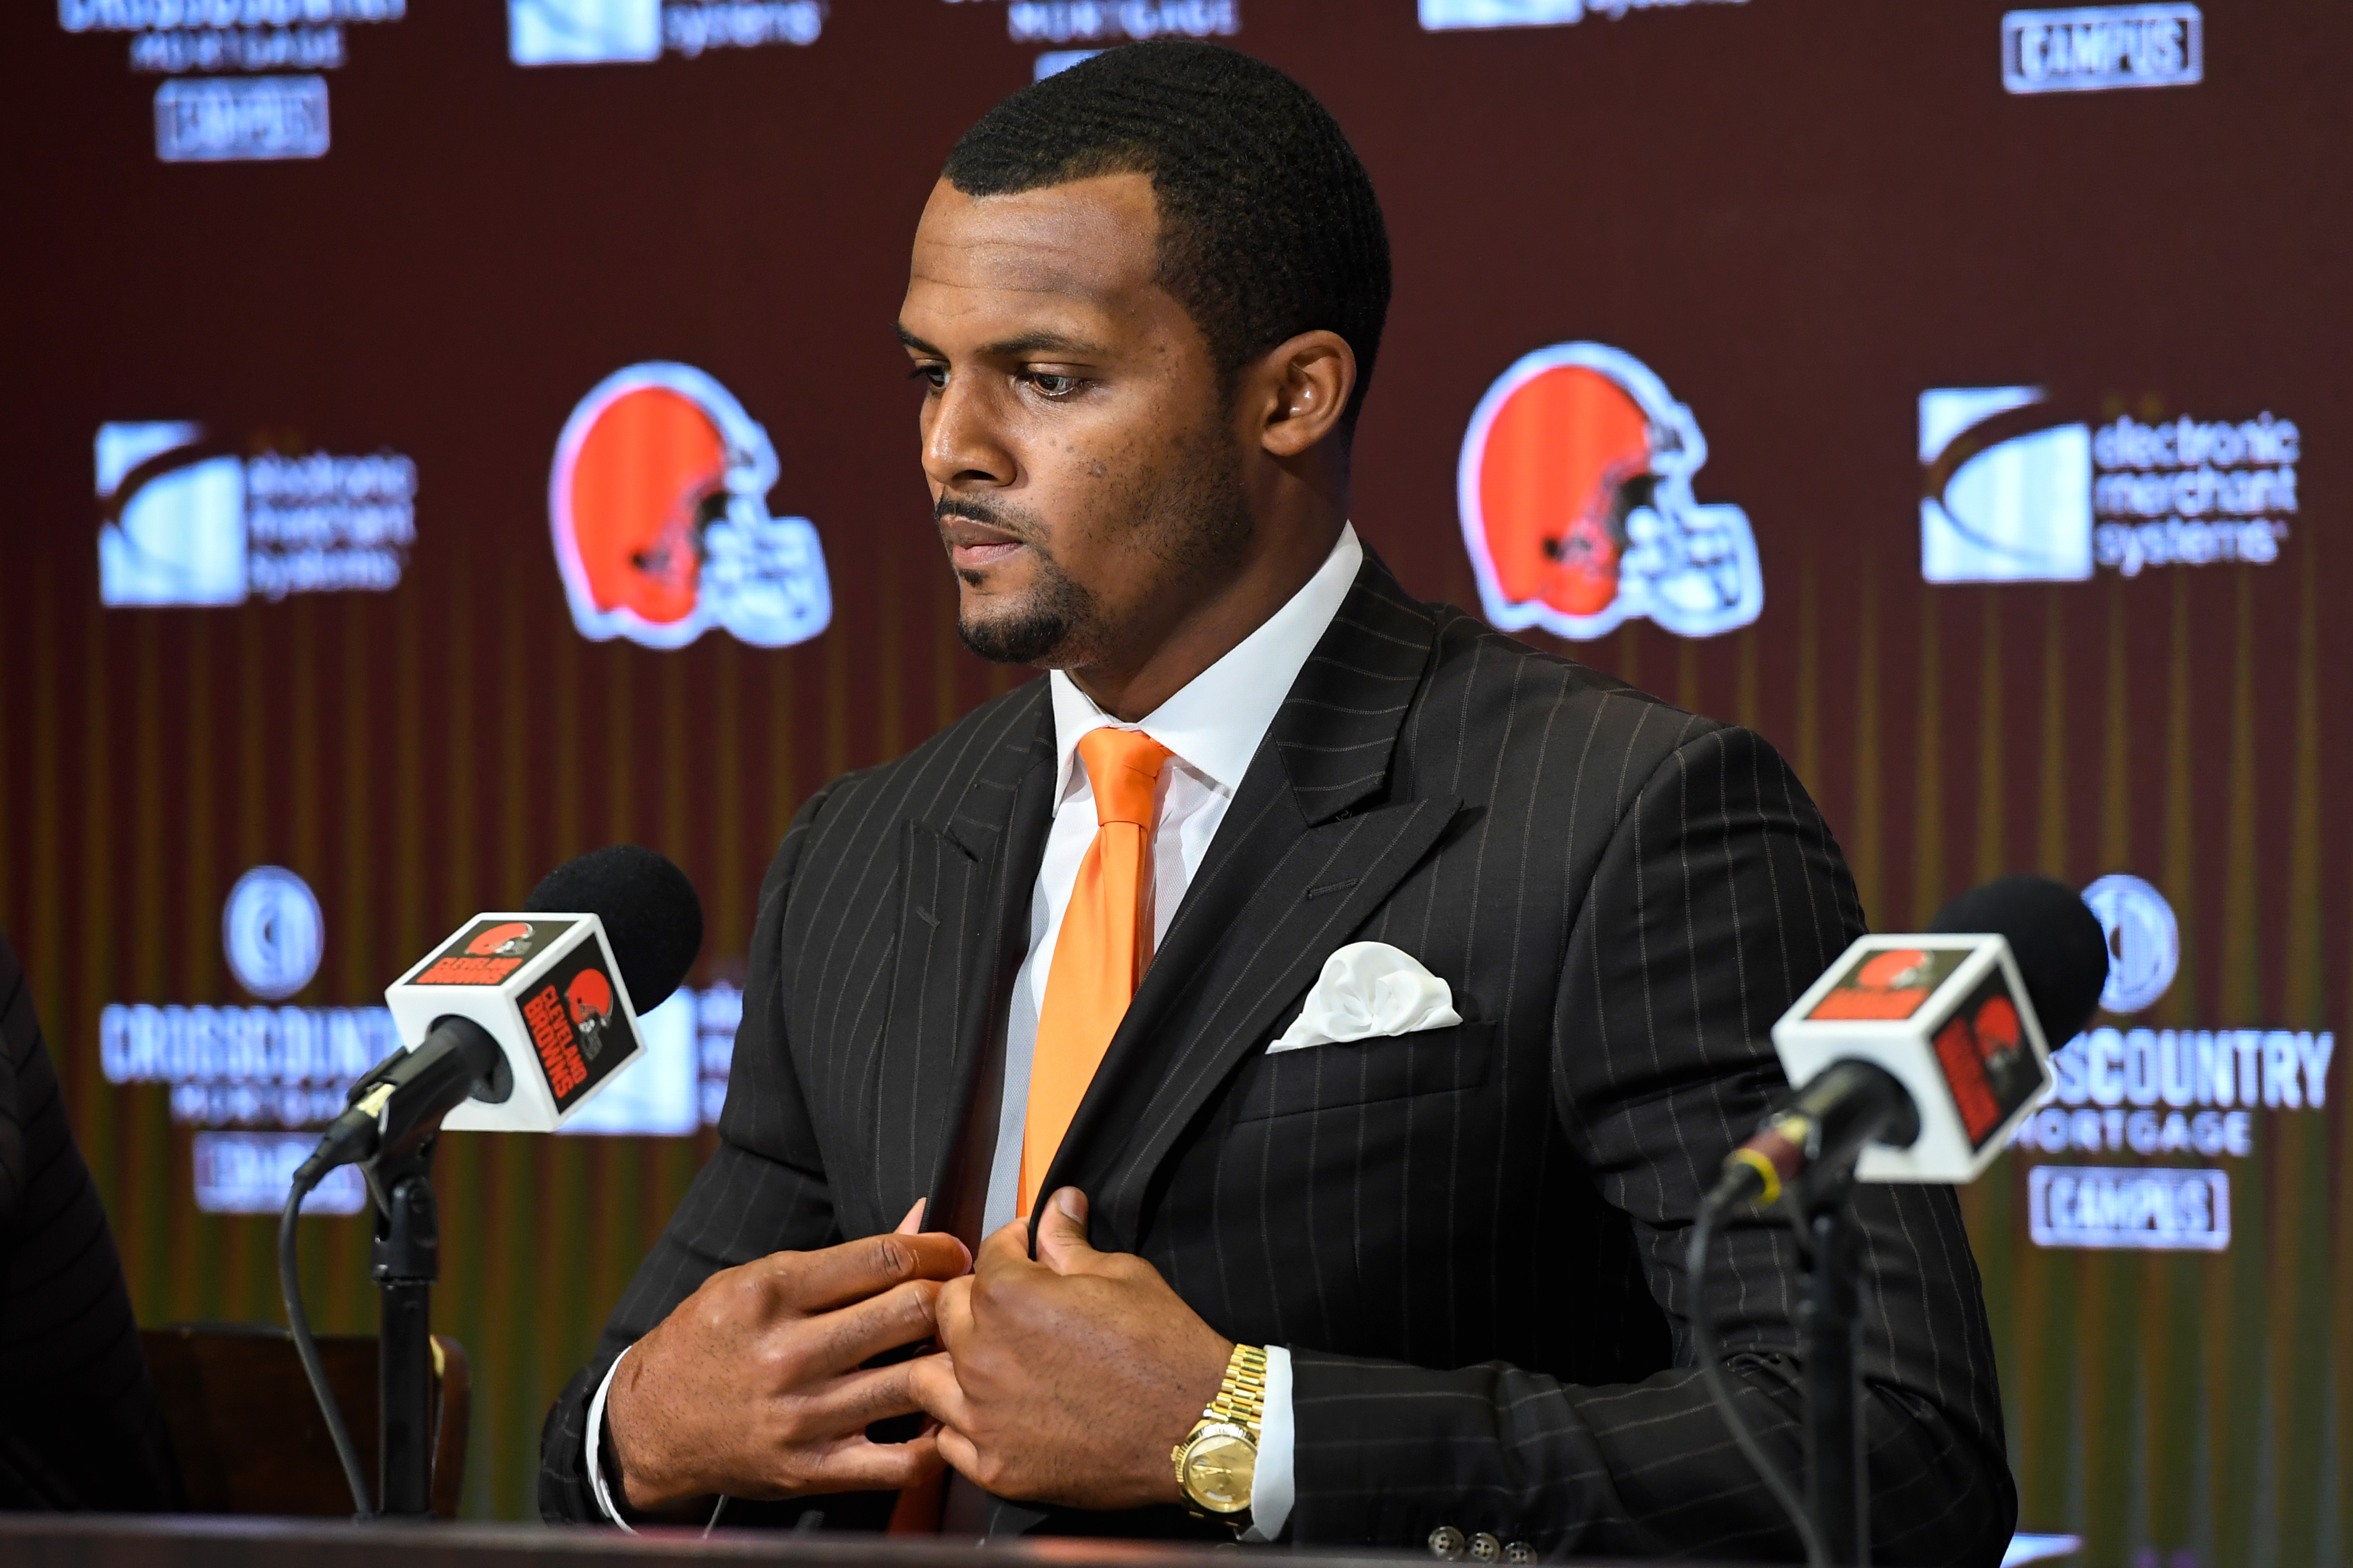 Deshaun Watson traded to Browns for three first-round draft picks, lands  $230 million fully guaranteed deal